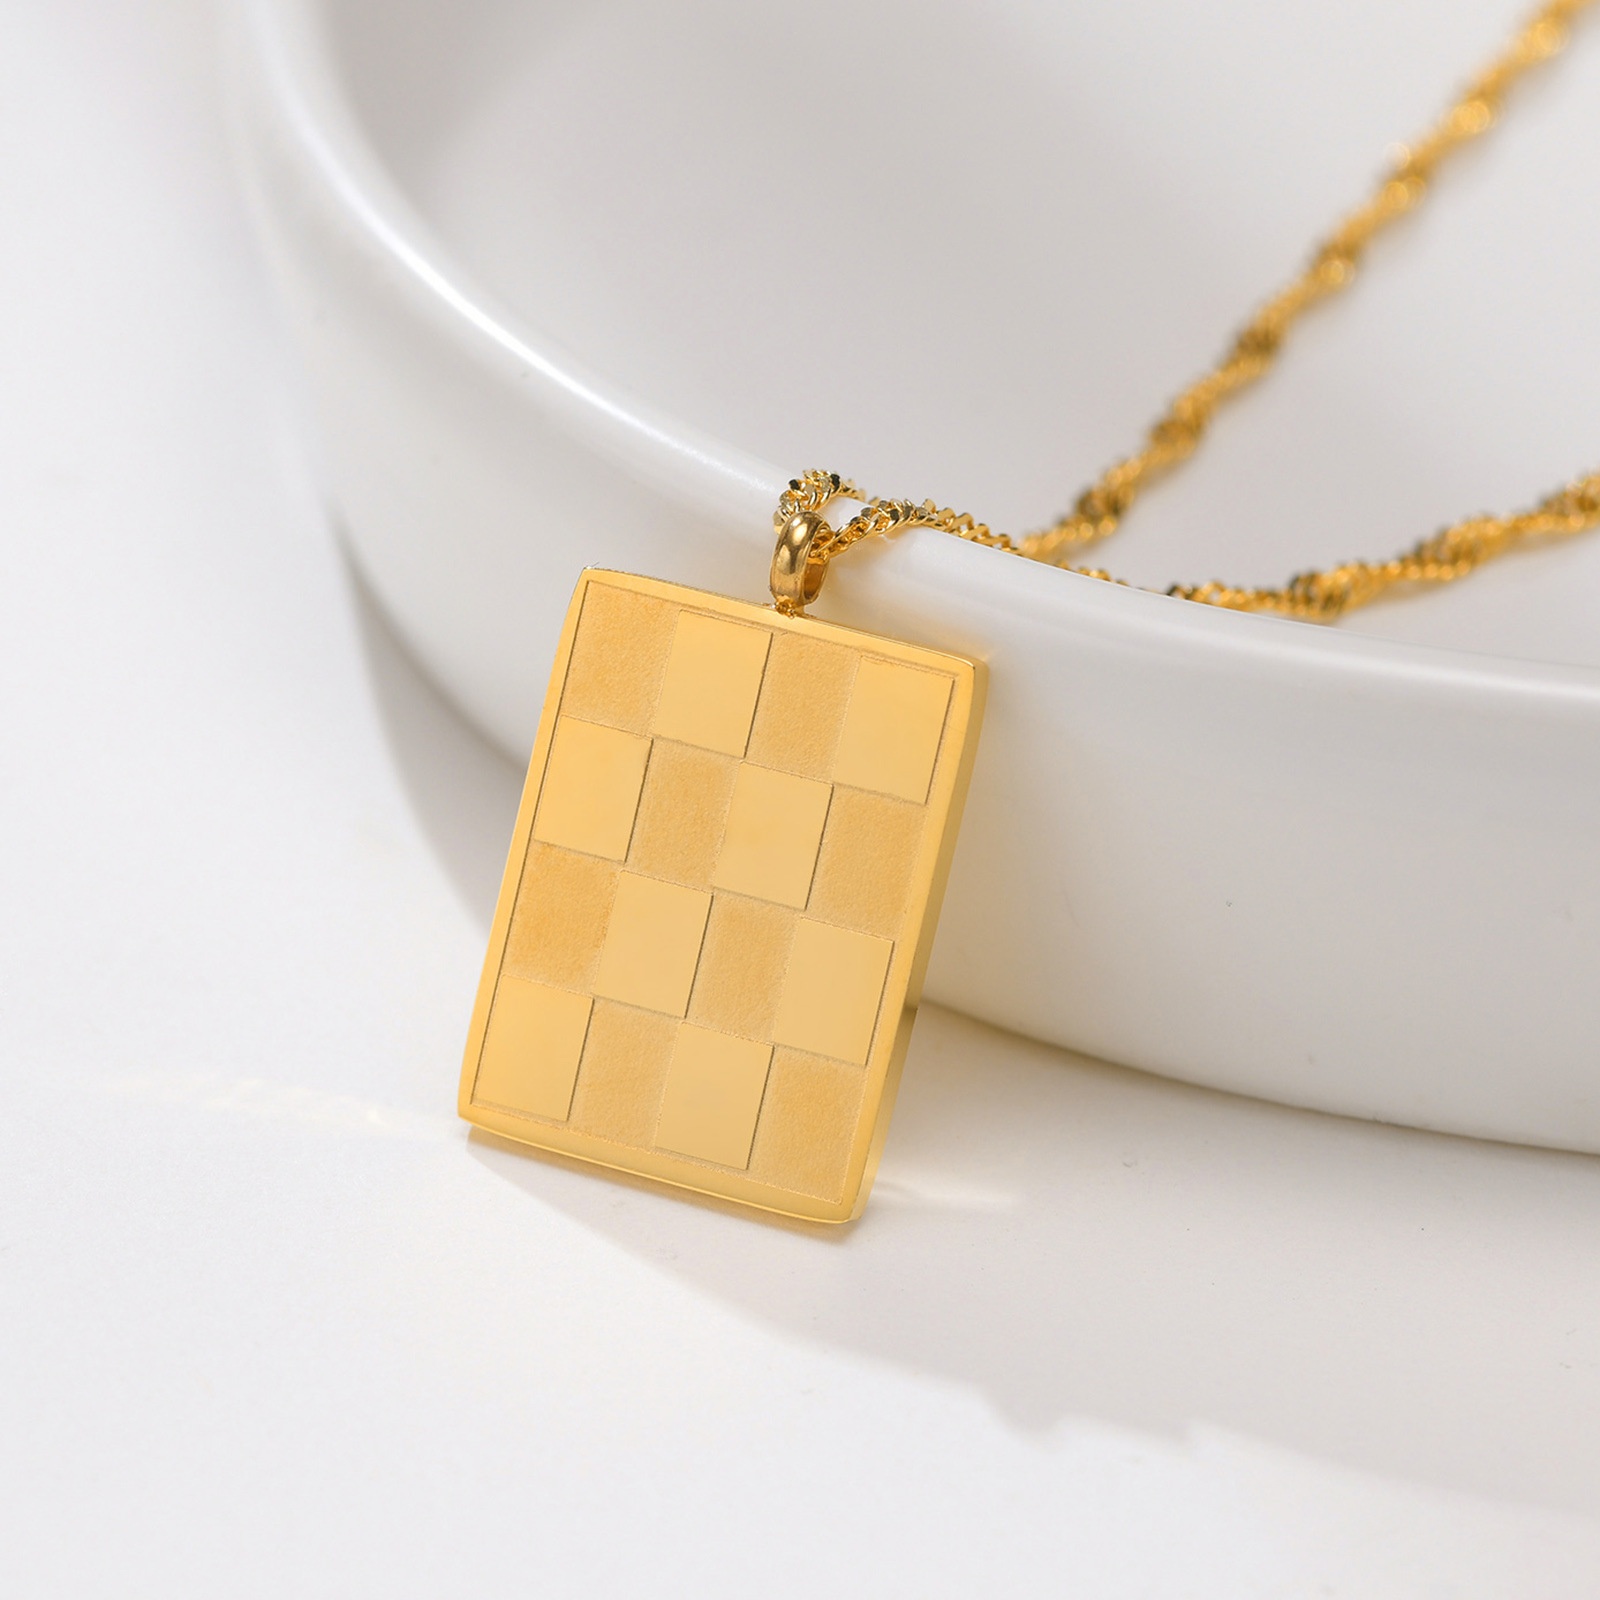 Stainless Steel Gold Checkerboard Geometric Pendant Necklace Female Personality Square Brand Pendant Jewelry